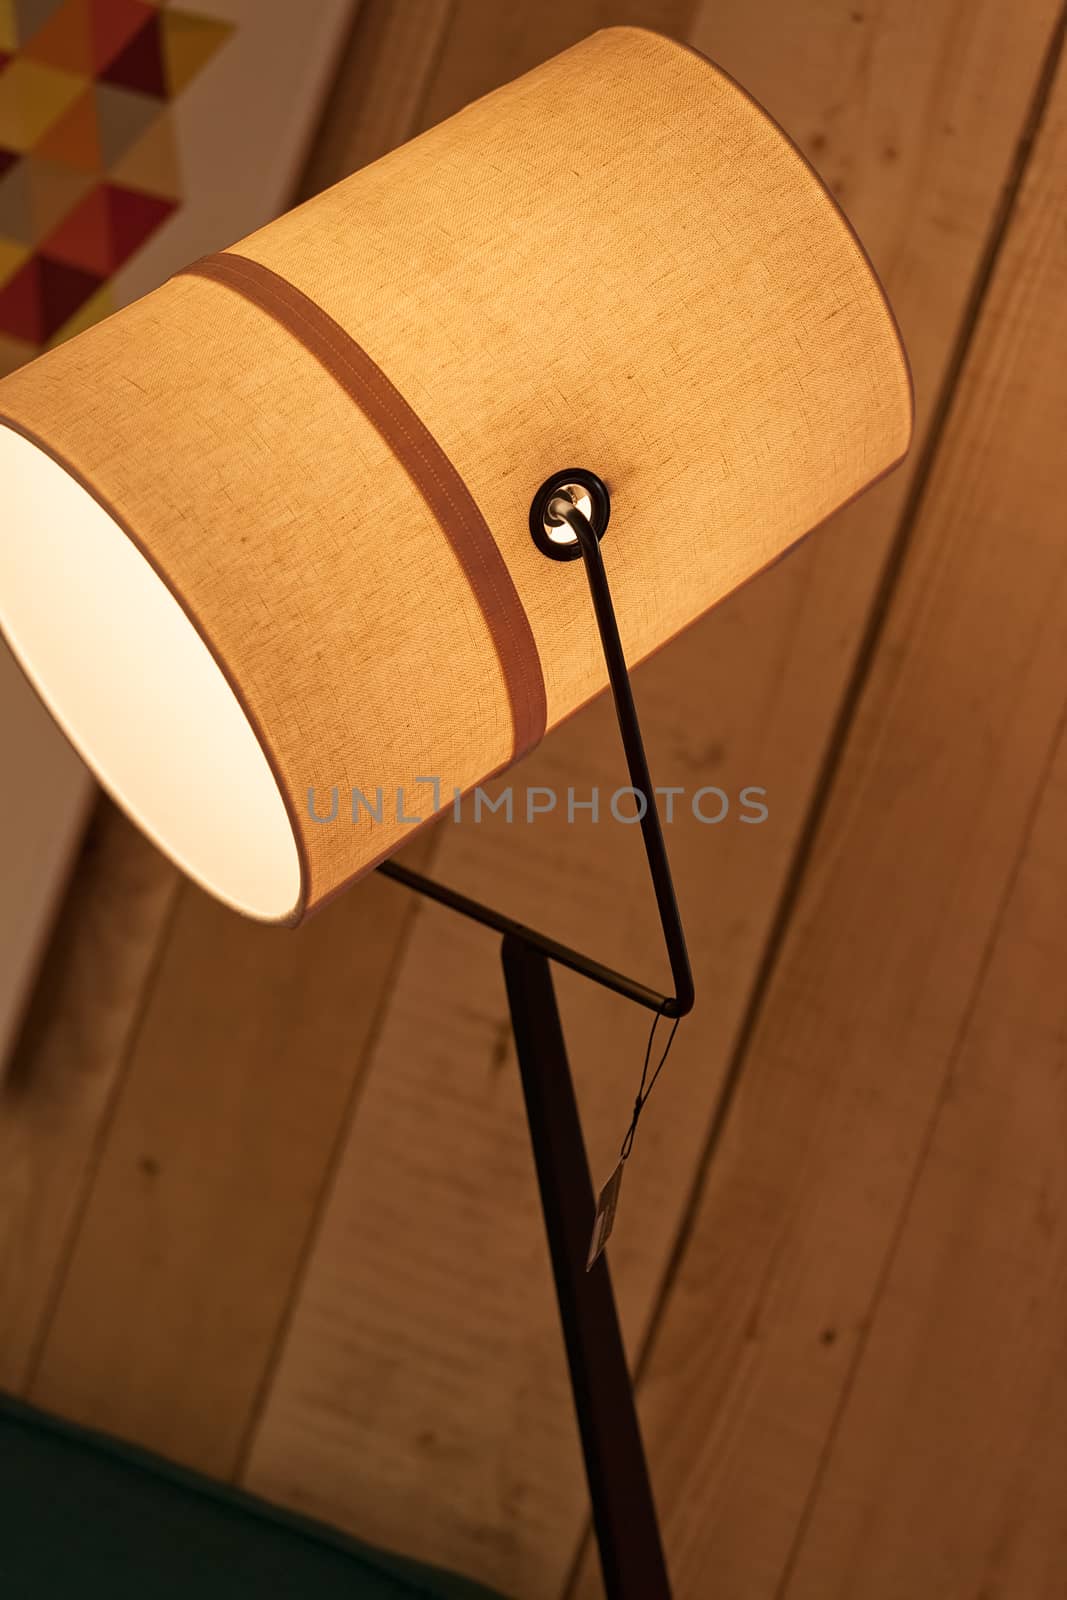 modern lamp made of canvas, note shallow depth of field